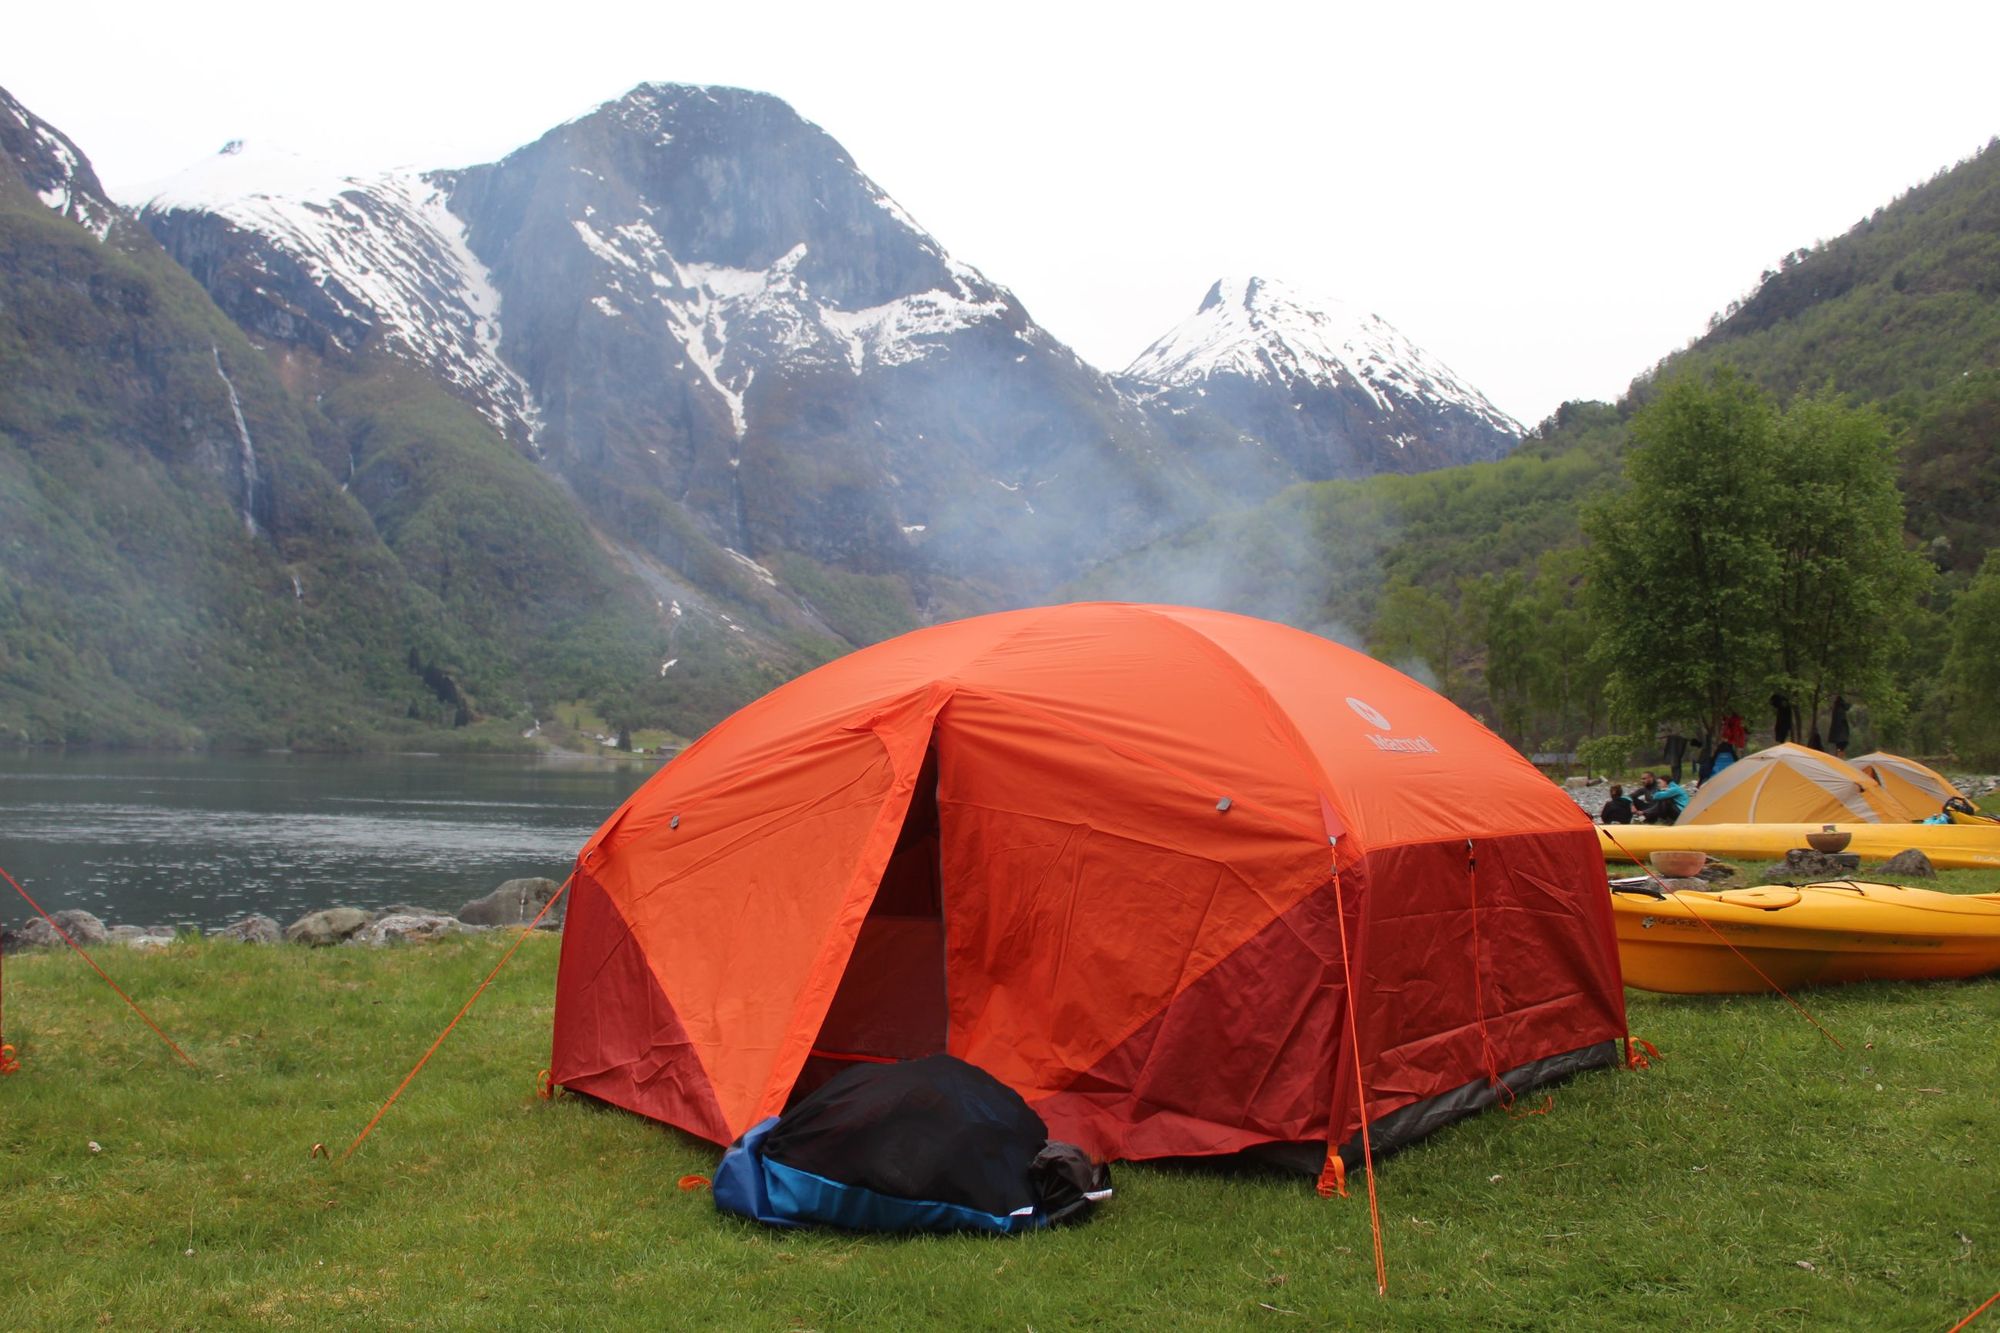 A tent set up on the egde of a fjord in Norway, with the mountains riding high in the backdrop